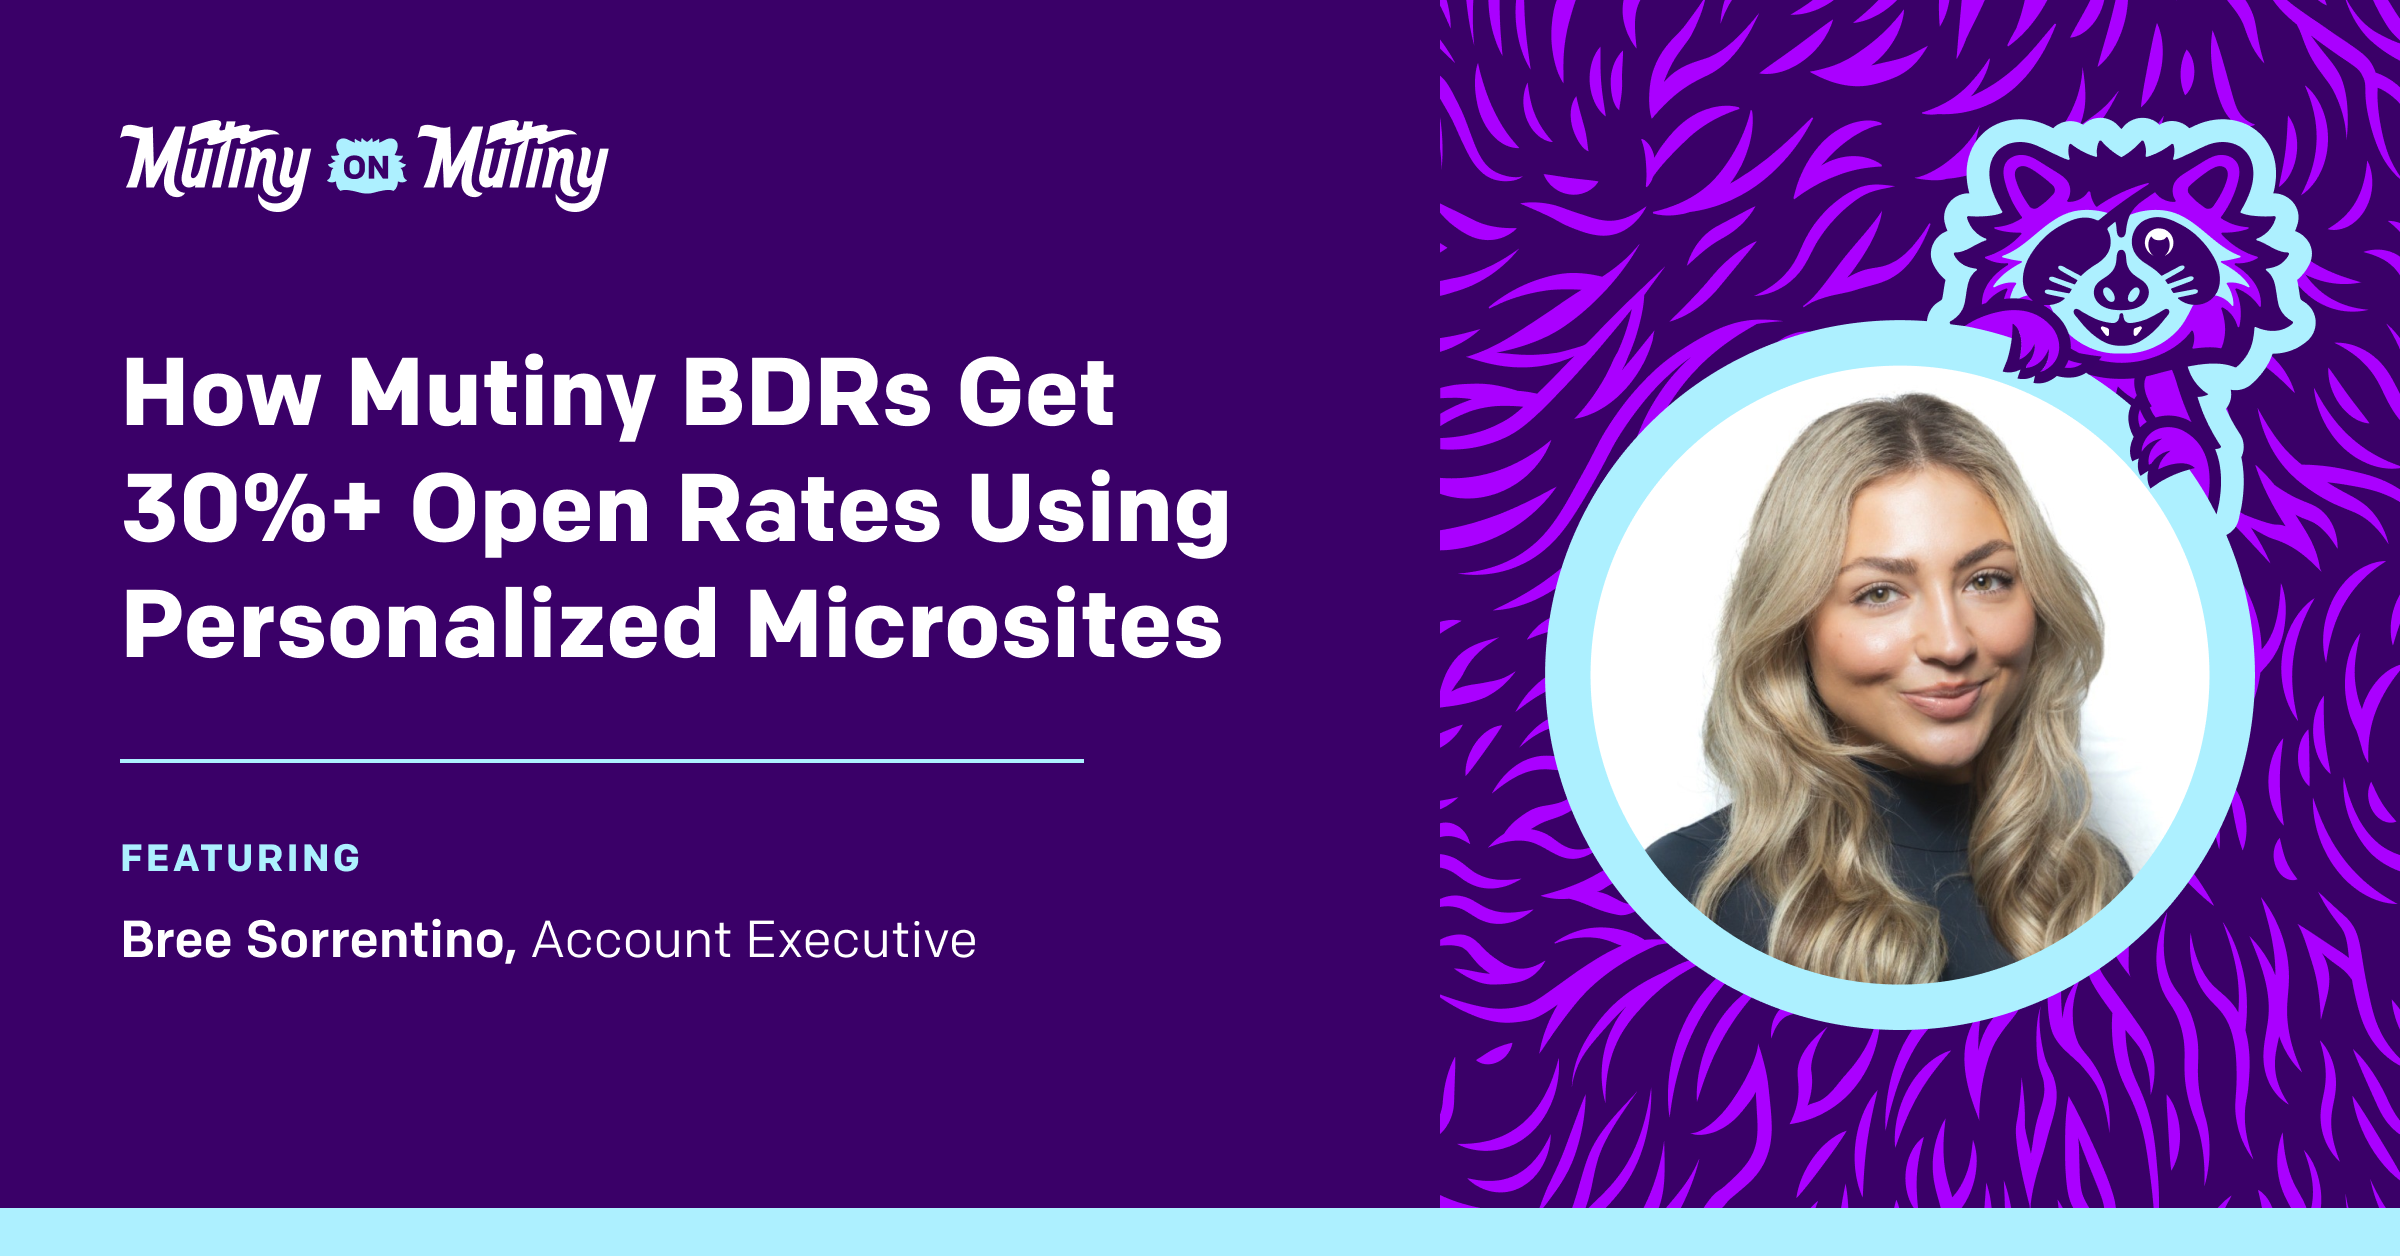 How Mutiny BDRs Get 30%+ Open Rates Using Personalized Microsites